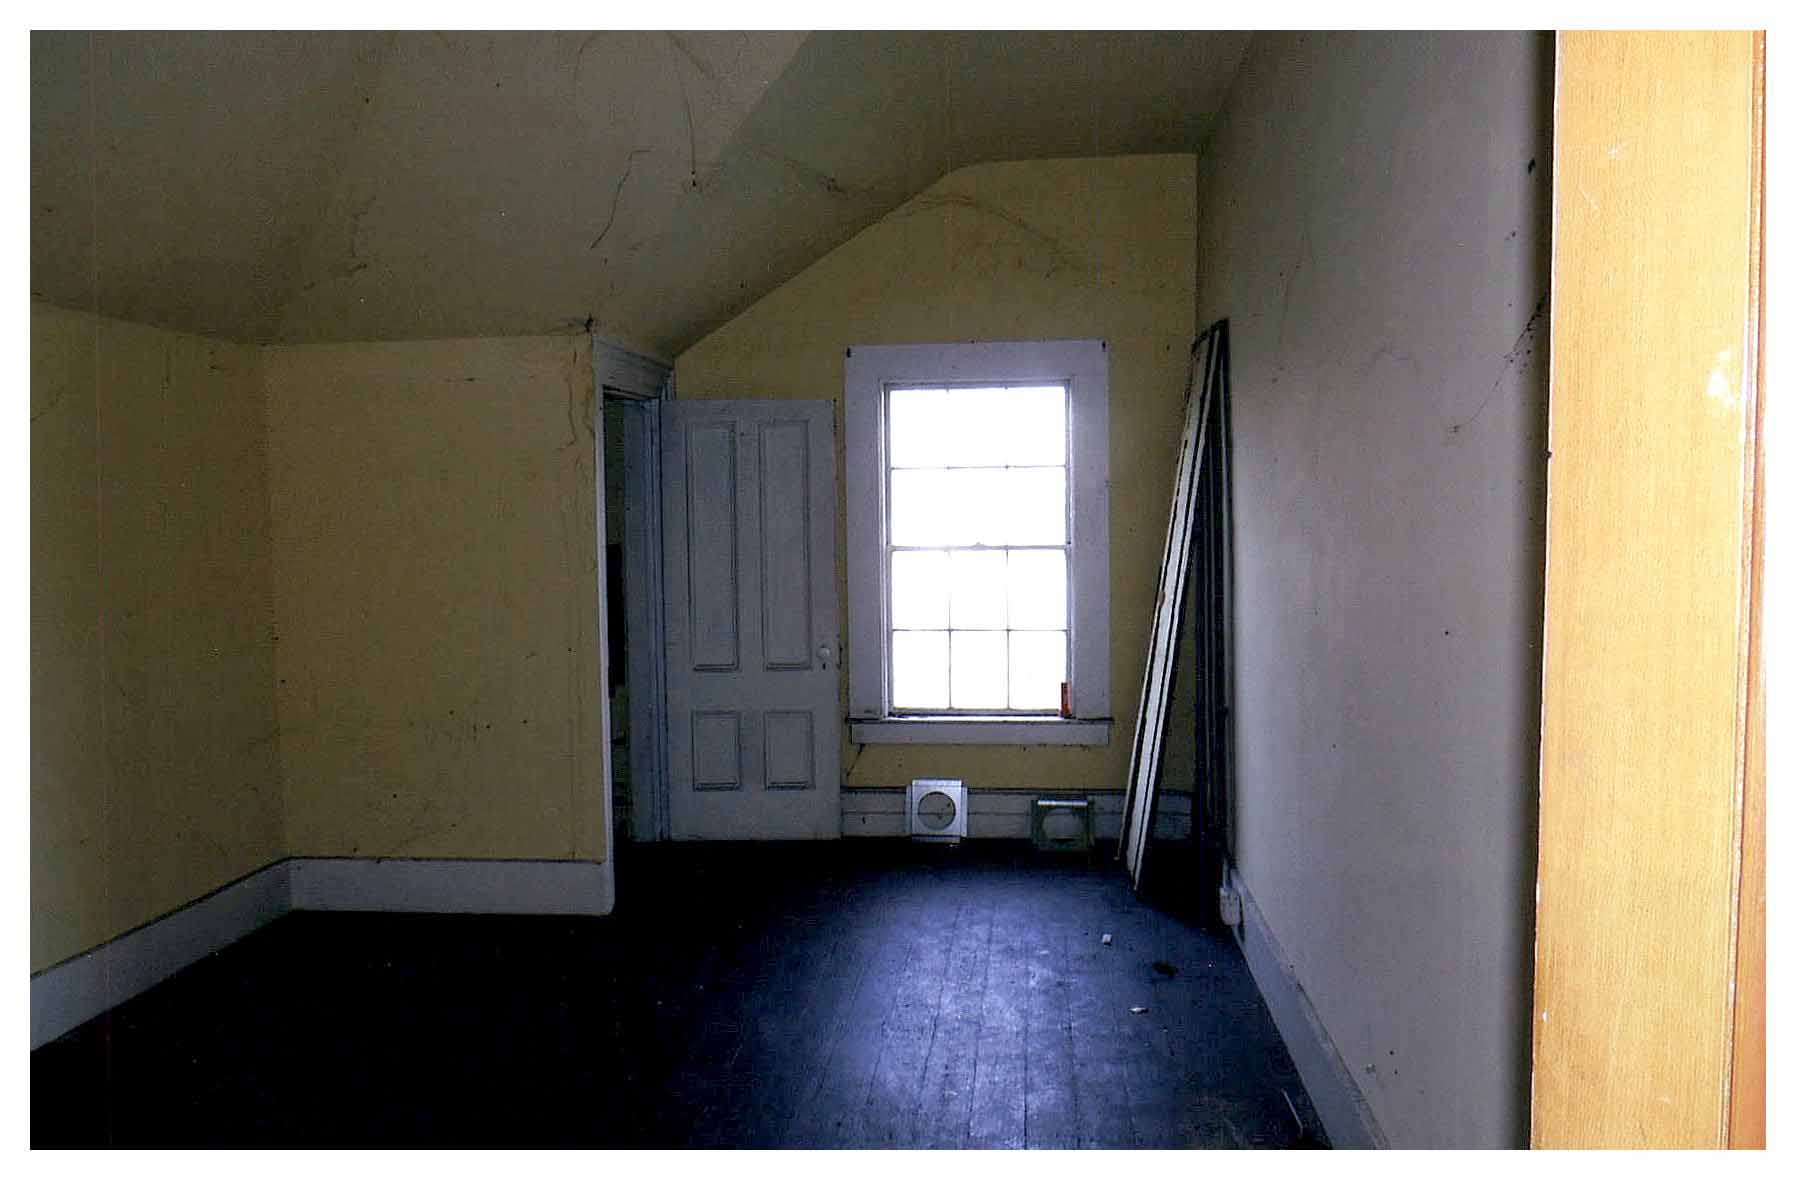 Before: same view of bedroom with unfinished floors, light yellow walls and a white sloped ceiling.